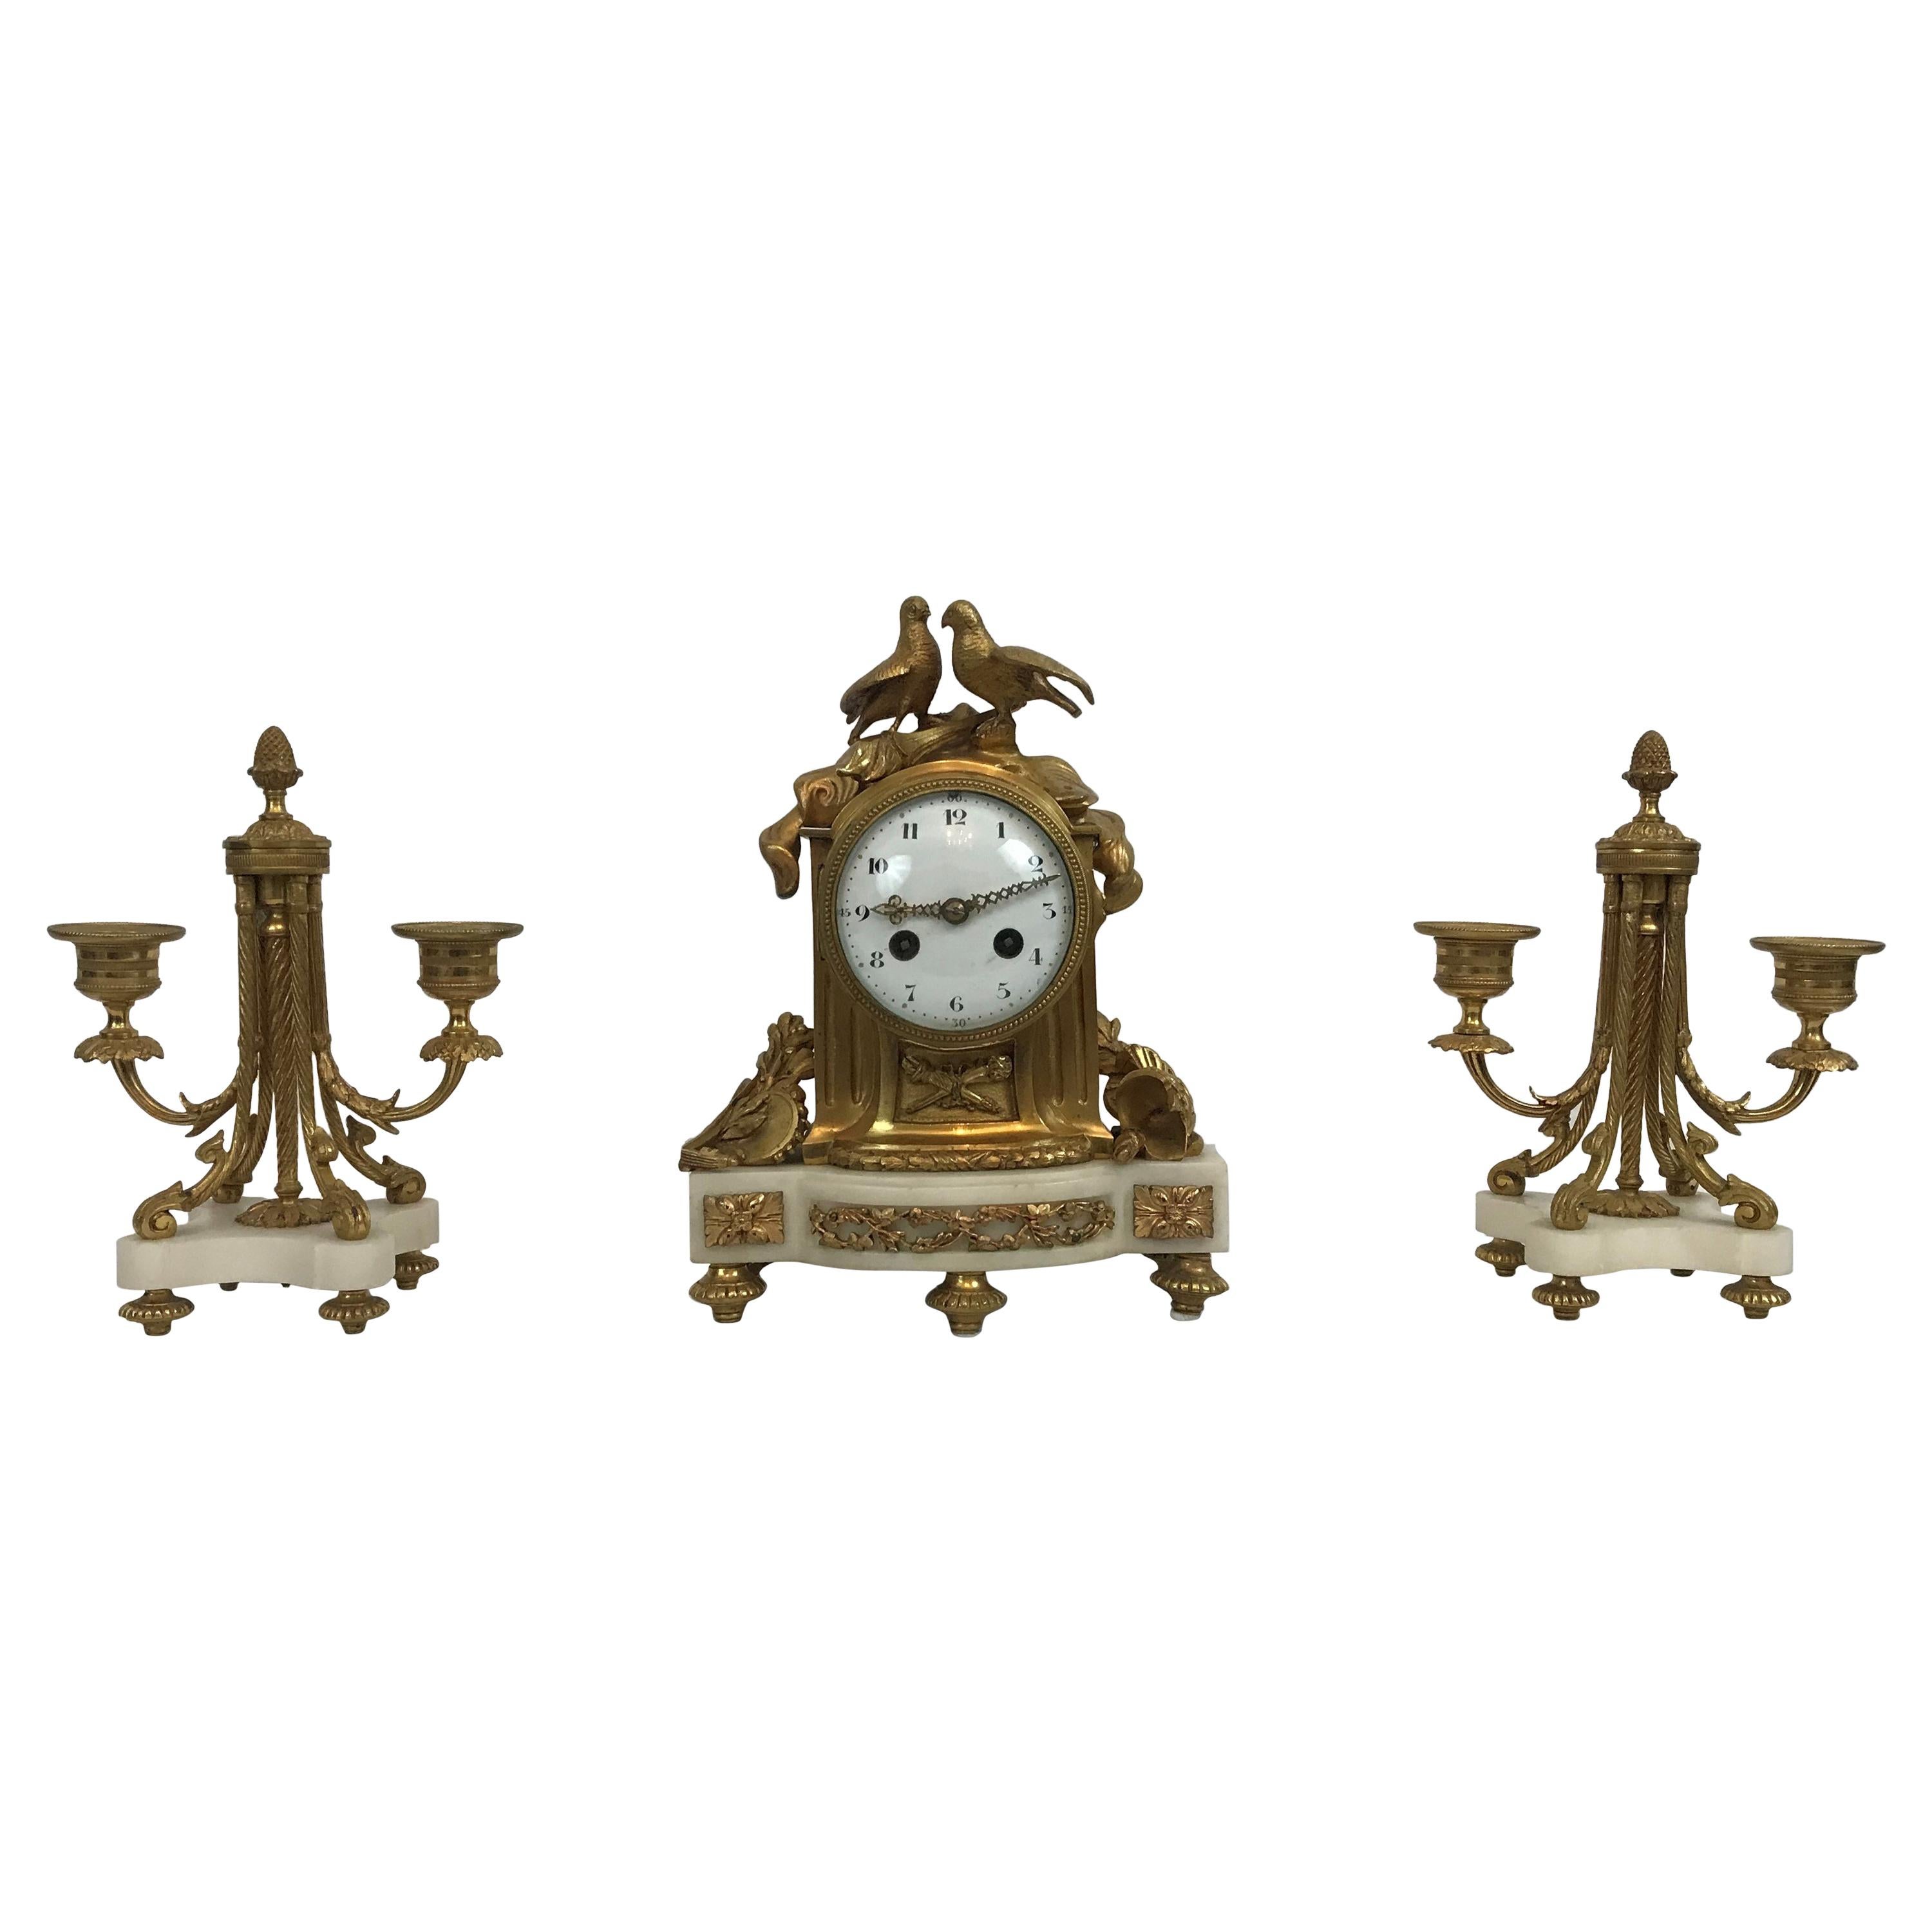 Vincenti et Cie Diminutive Clock Set, French Marble and Ormolu, circa 1890-1900 For Sale